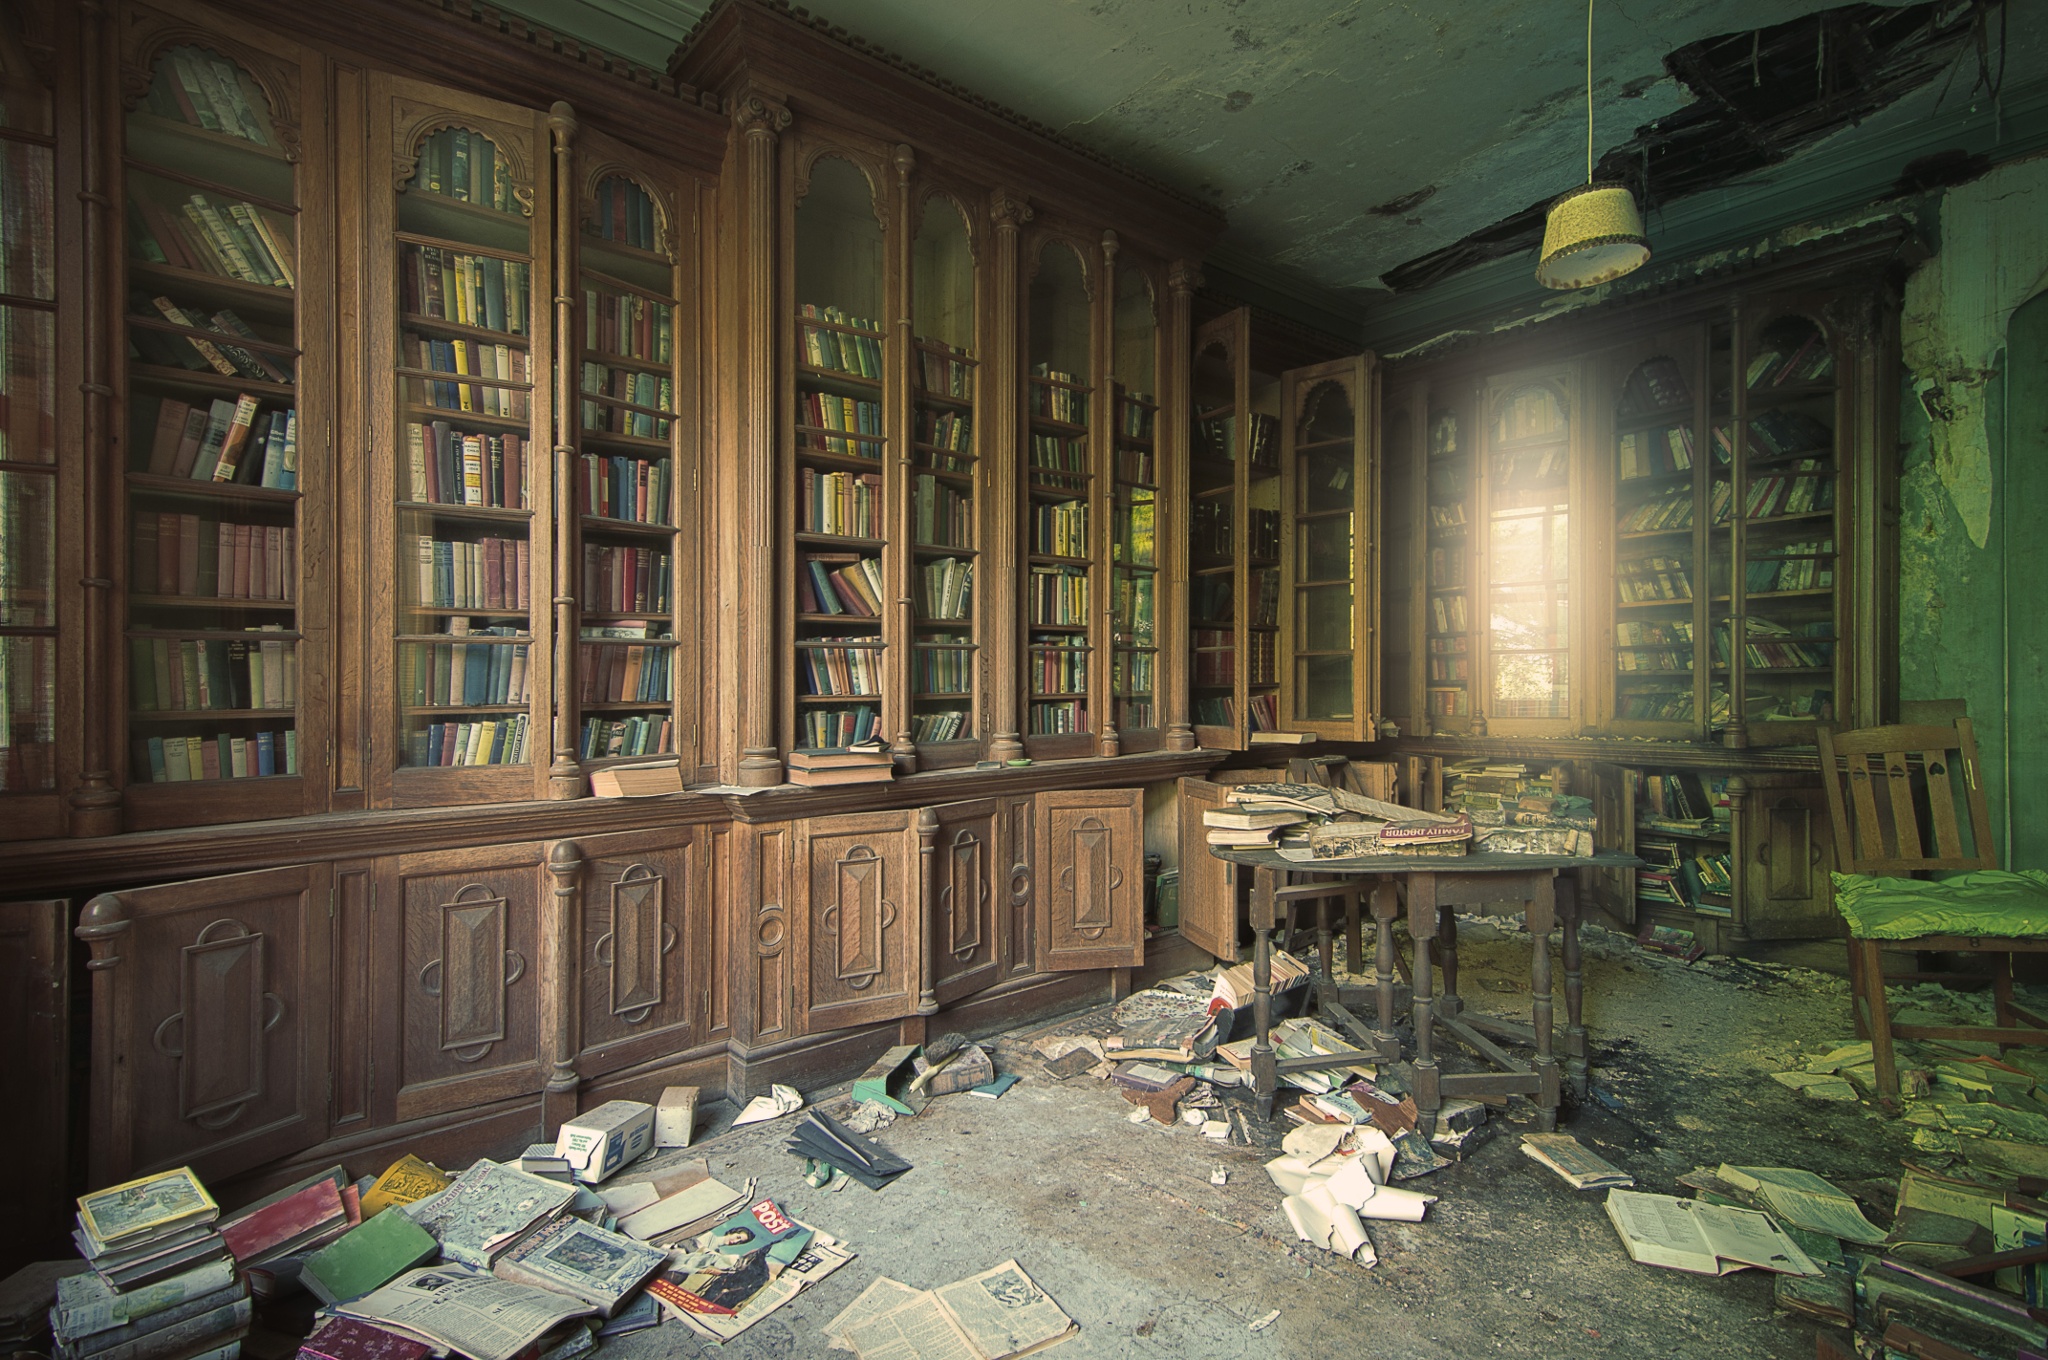 General 2048x1360 building abandoned interior library books messy